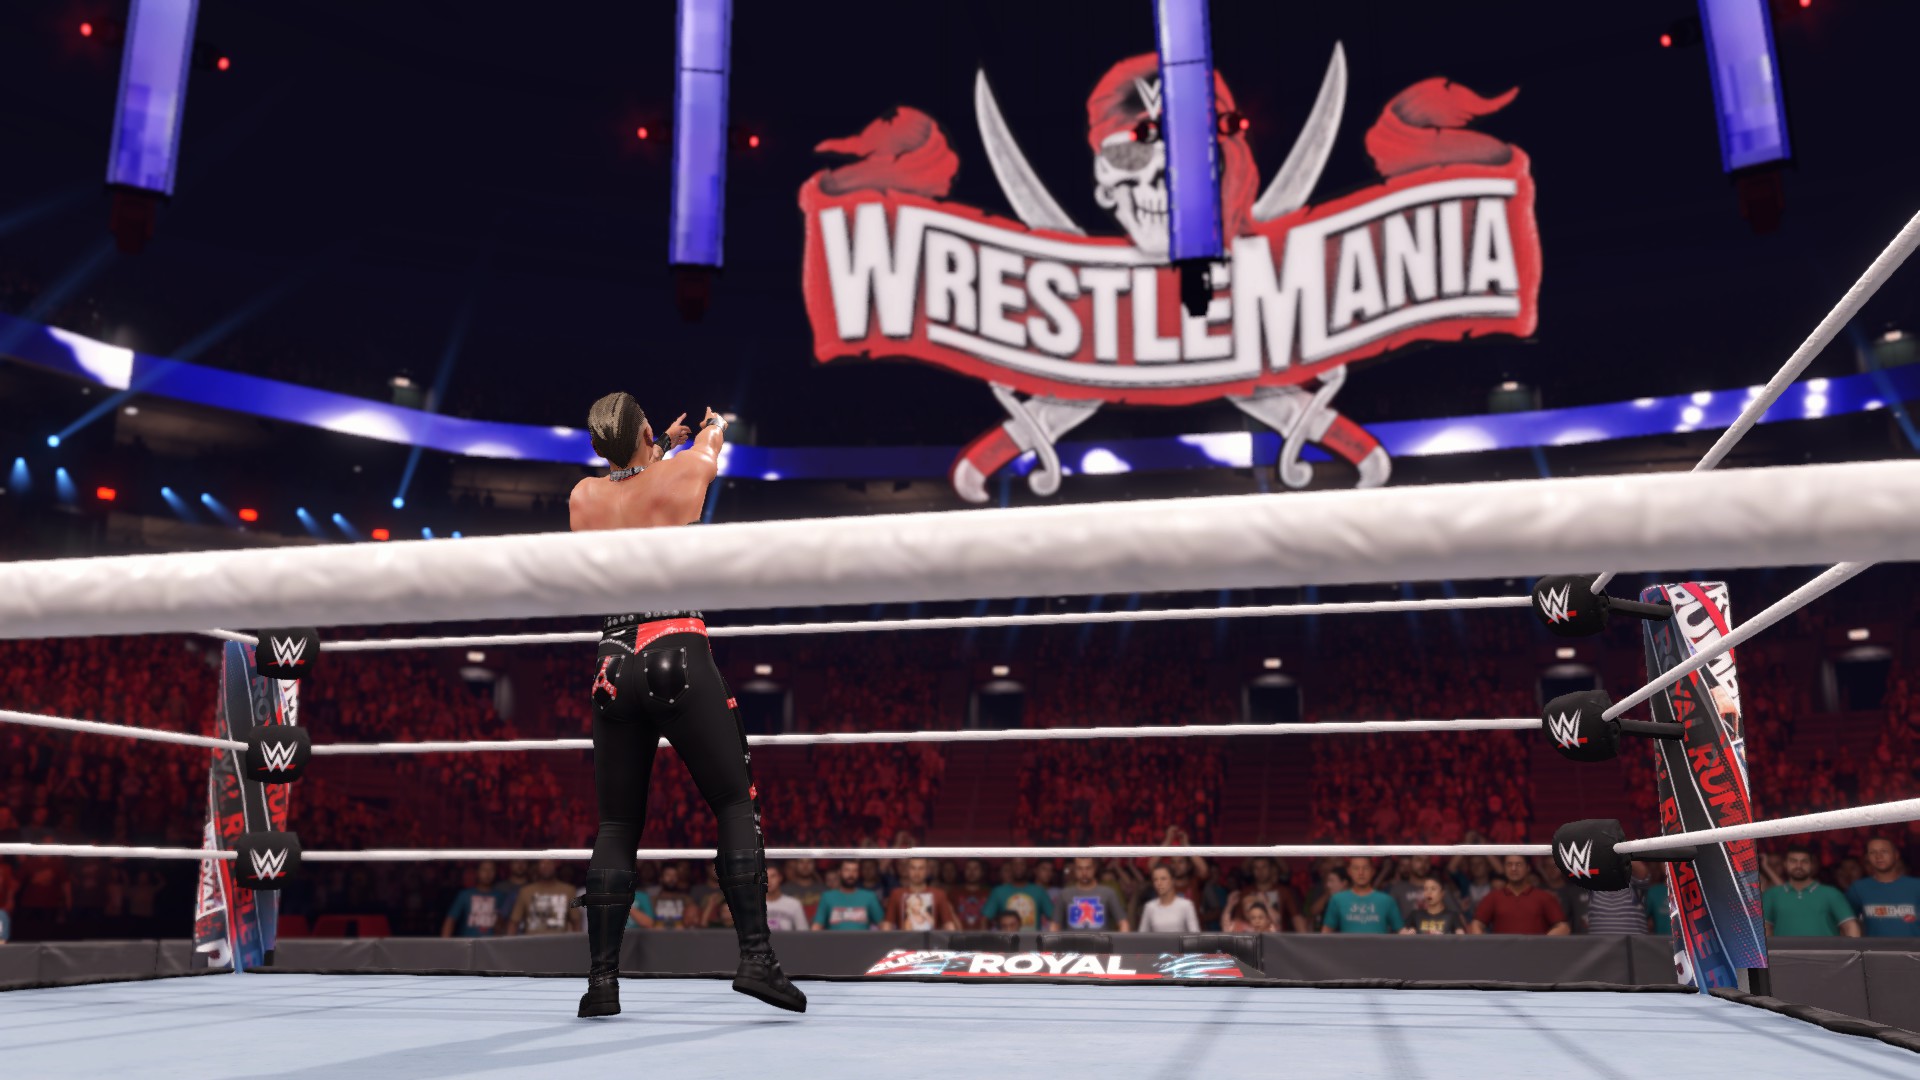 WWE 2K22 Rhea Ripley pointing at the WrestleMania sign